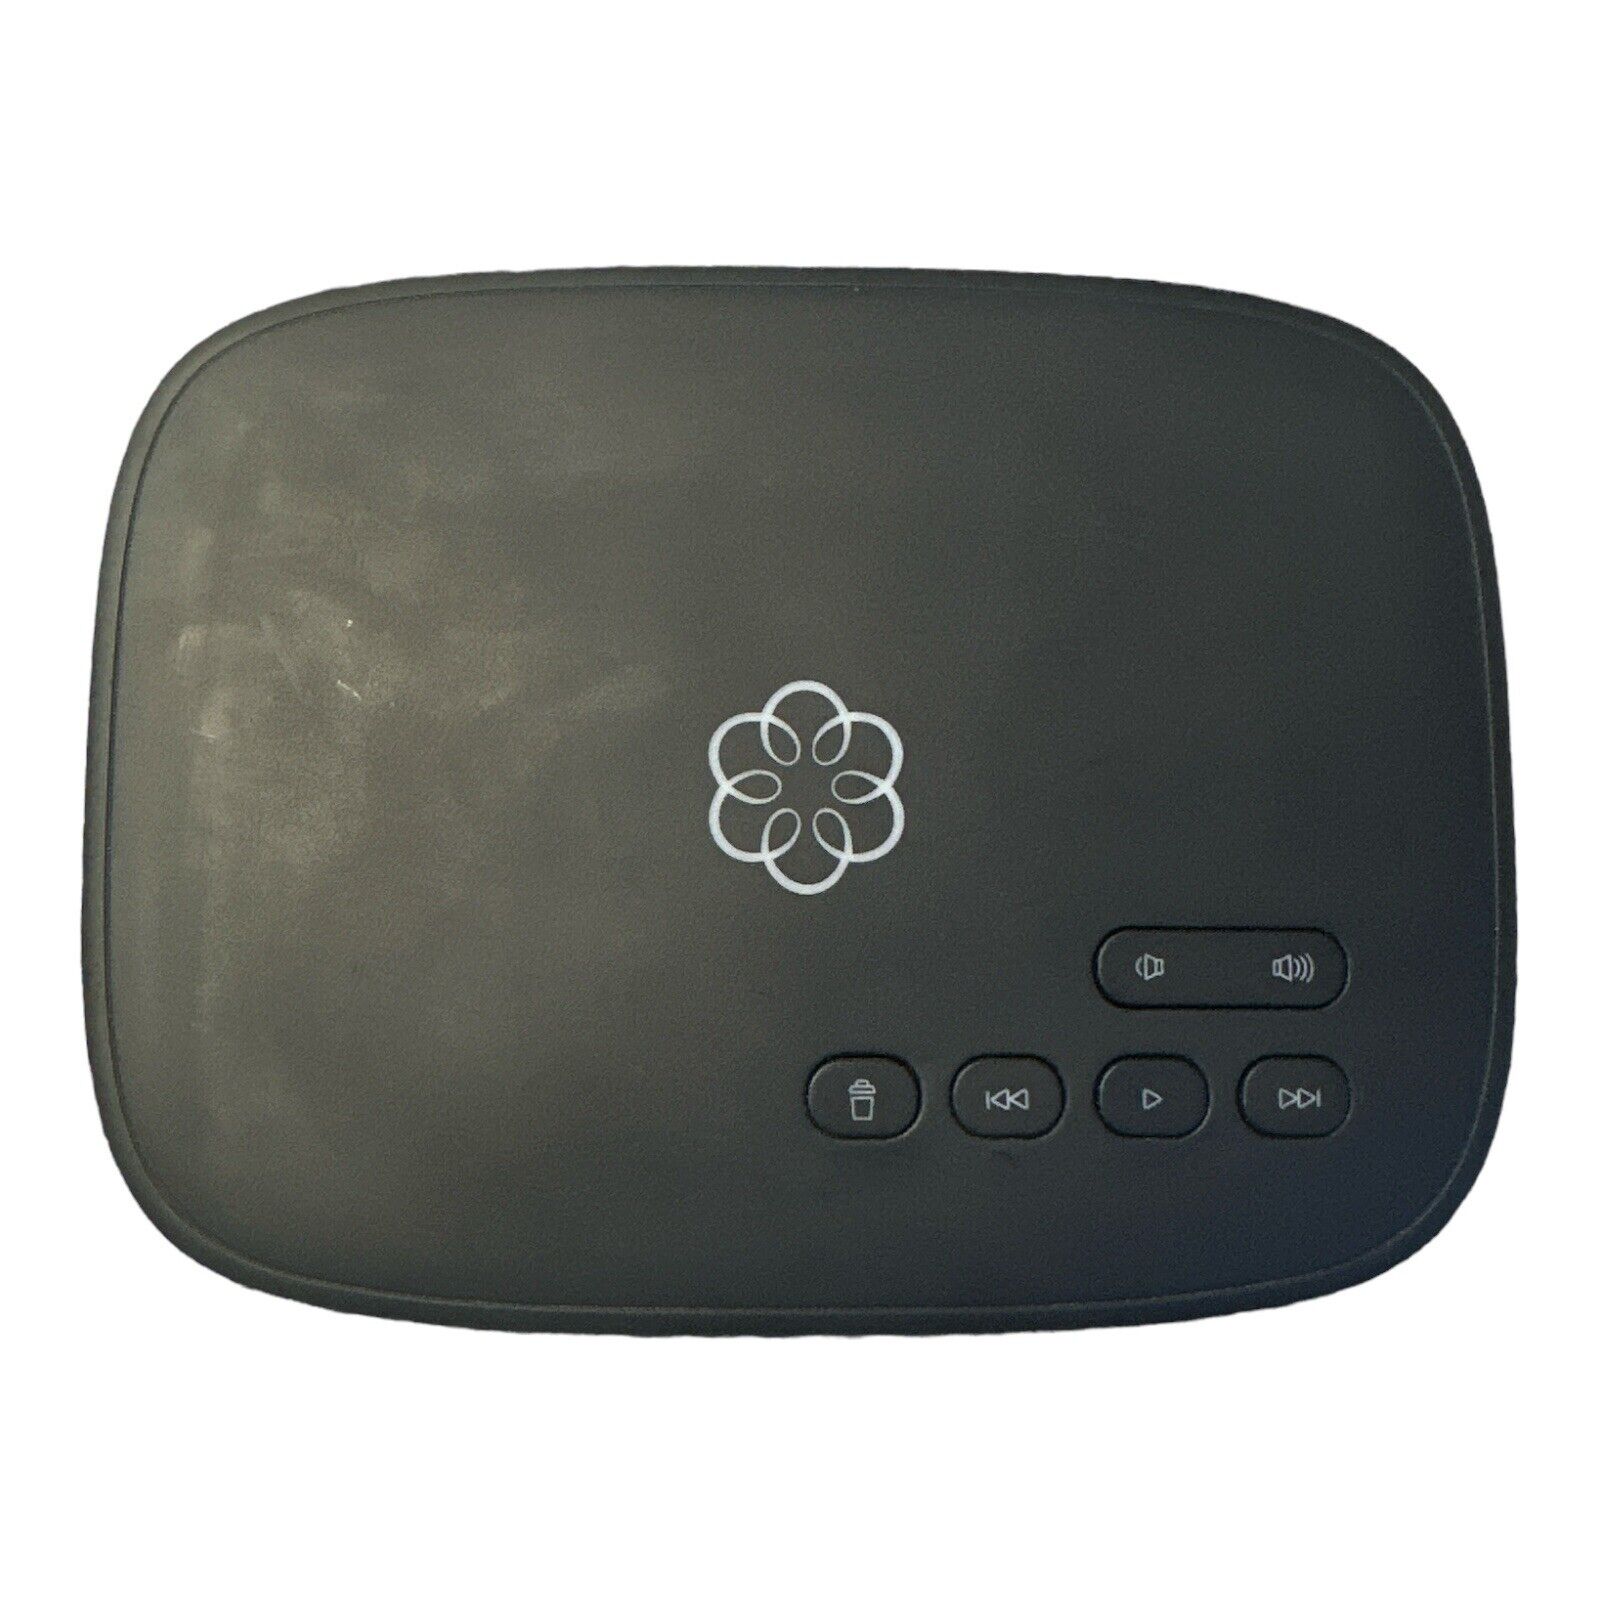 Ooma Telo TELO104 Smart Home Phone Without Power Cord